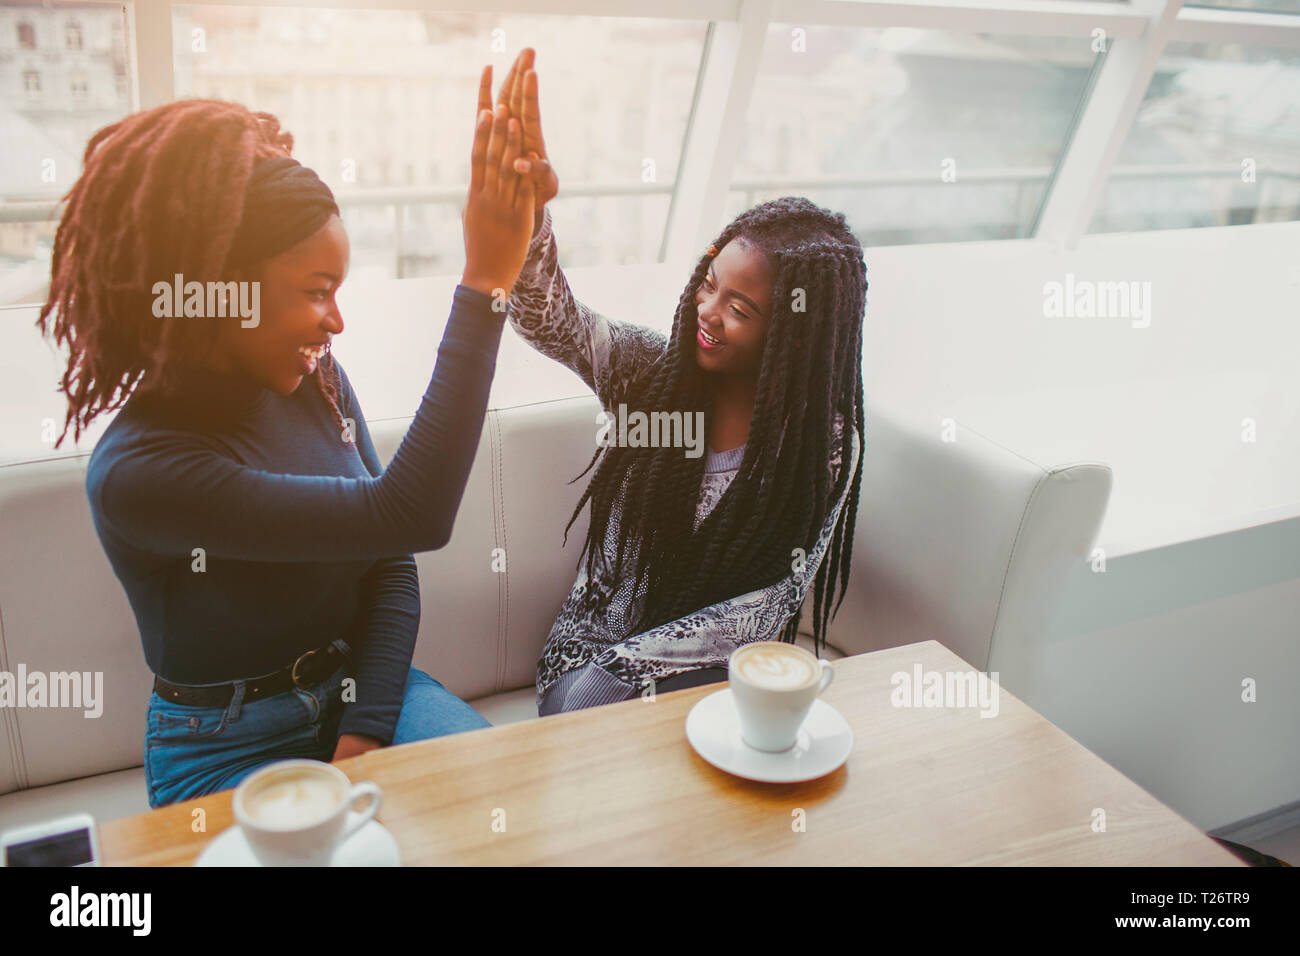 Tow african models give high five one to another. They look at each other and smile. Frieds spend time in cafe at window Stock Photo